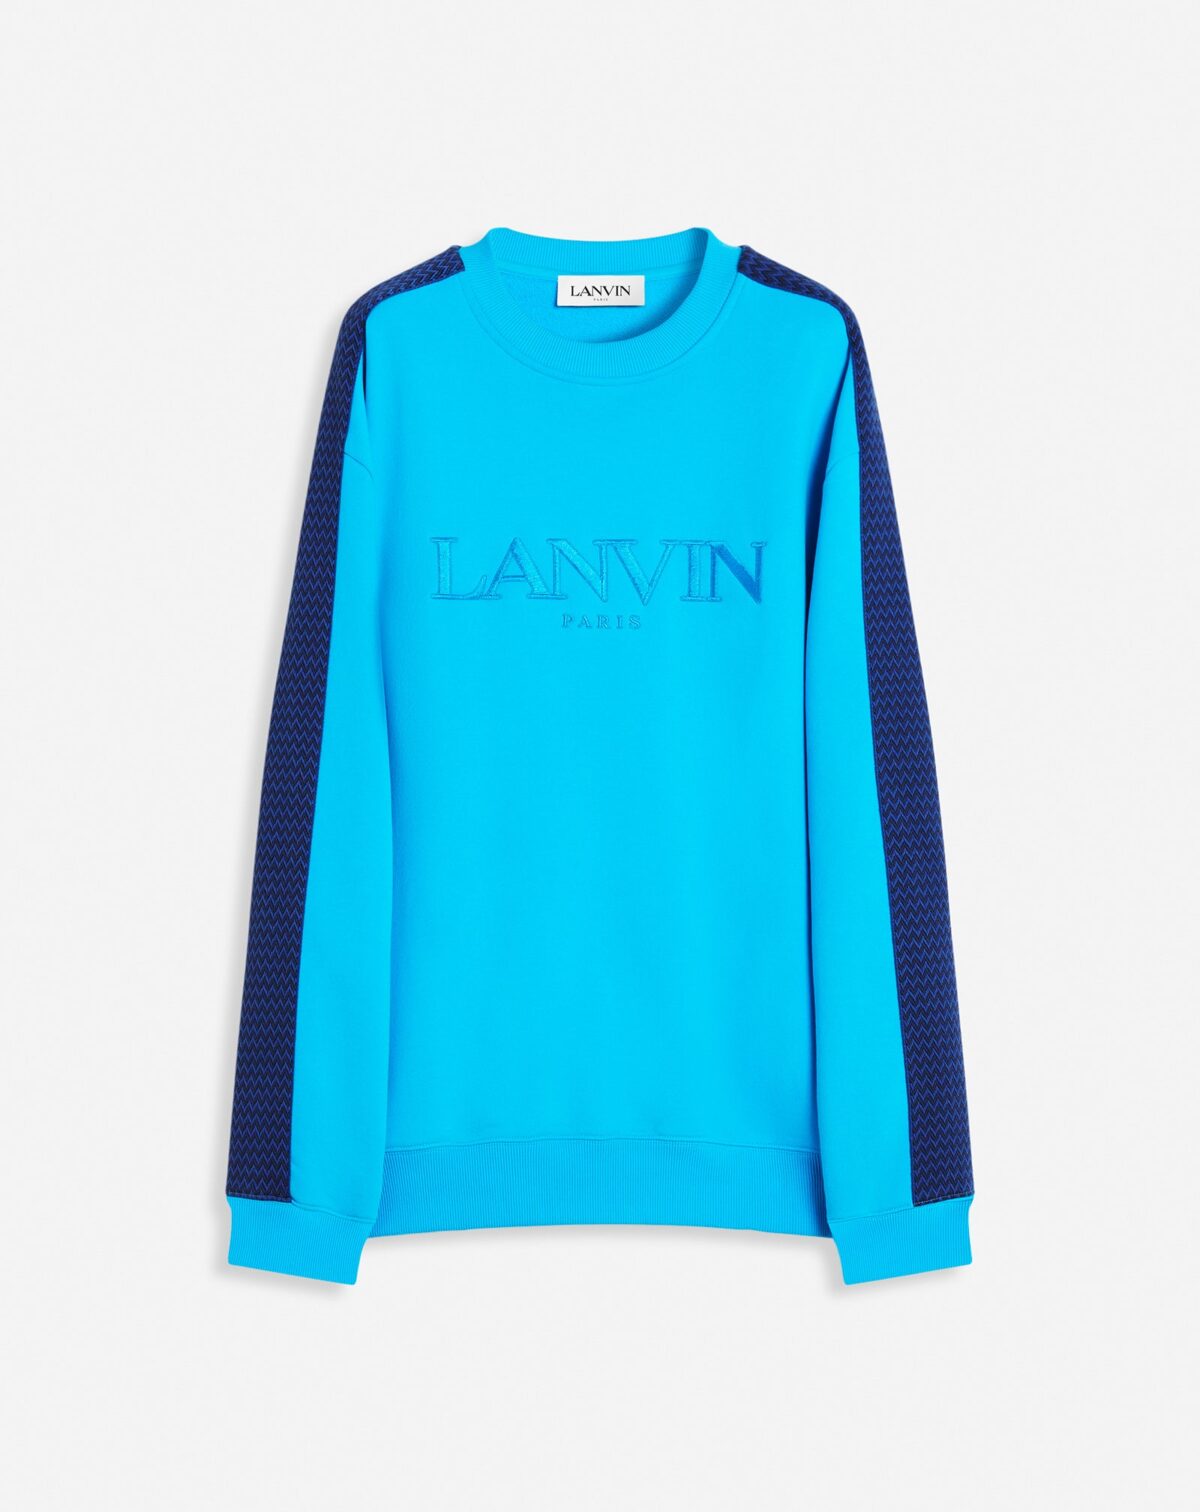 CURB SIDE LANVIN EMBROIDERED LOOSE-FITTING SWEATSHIRT Green